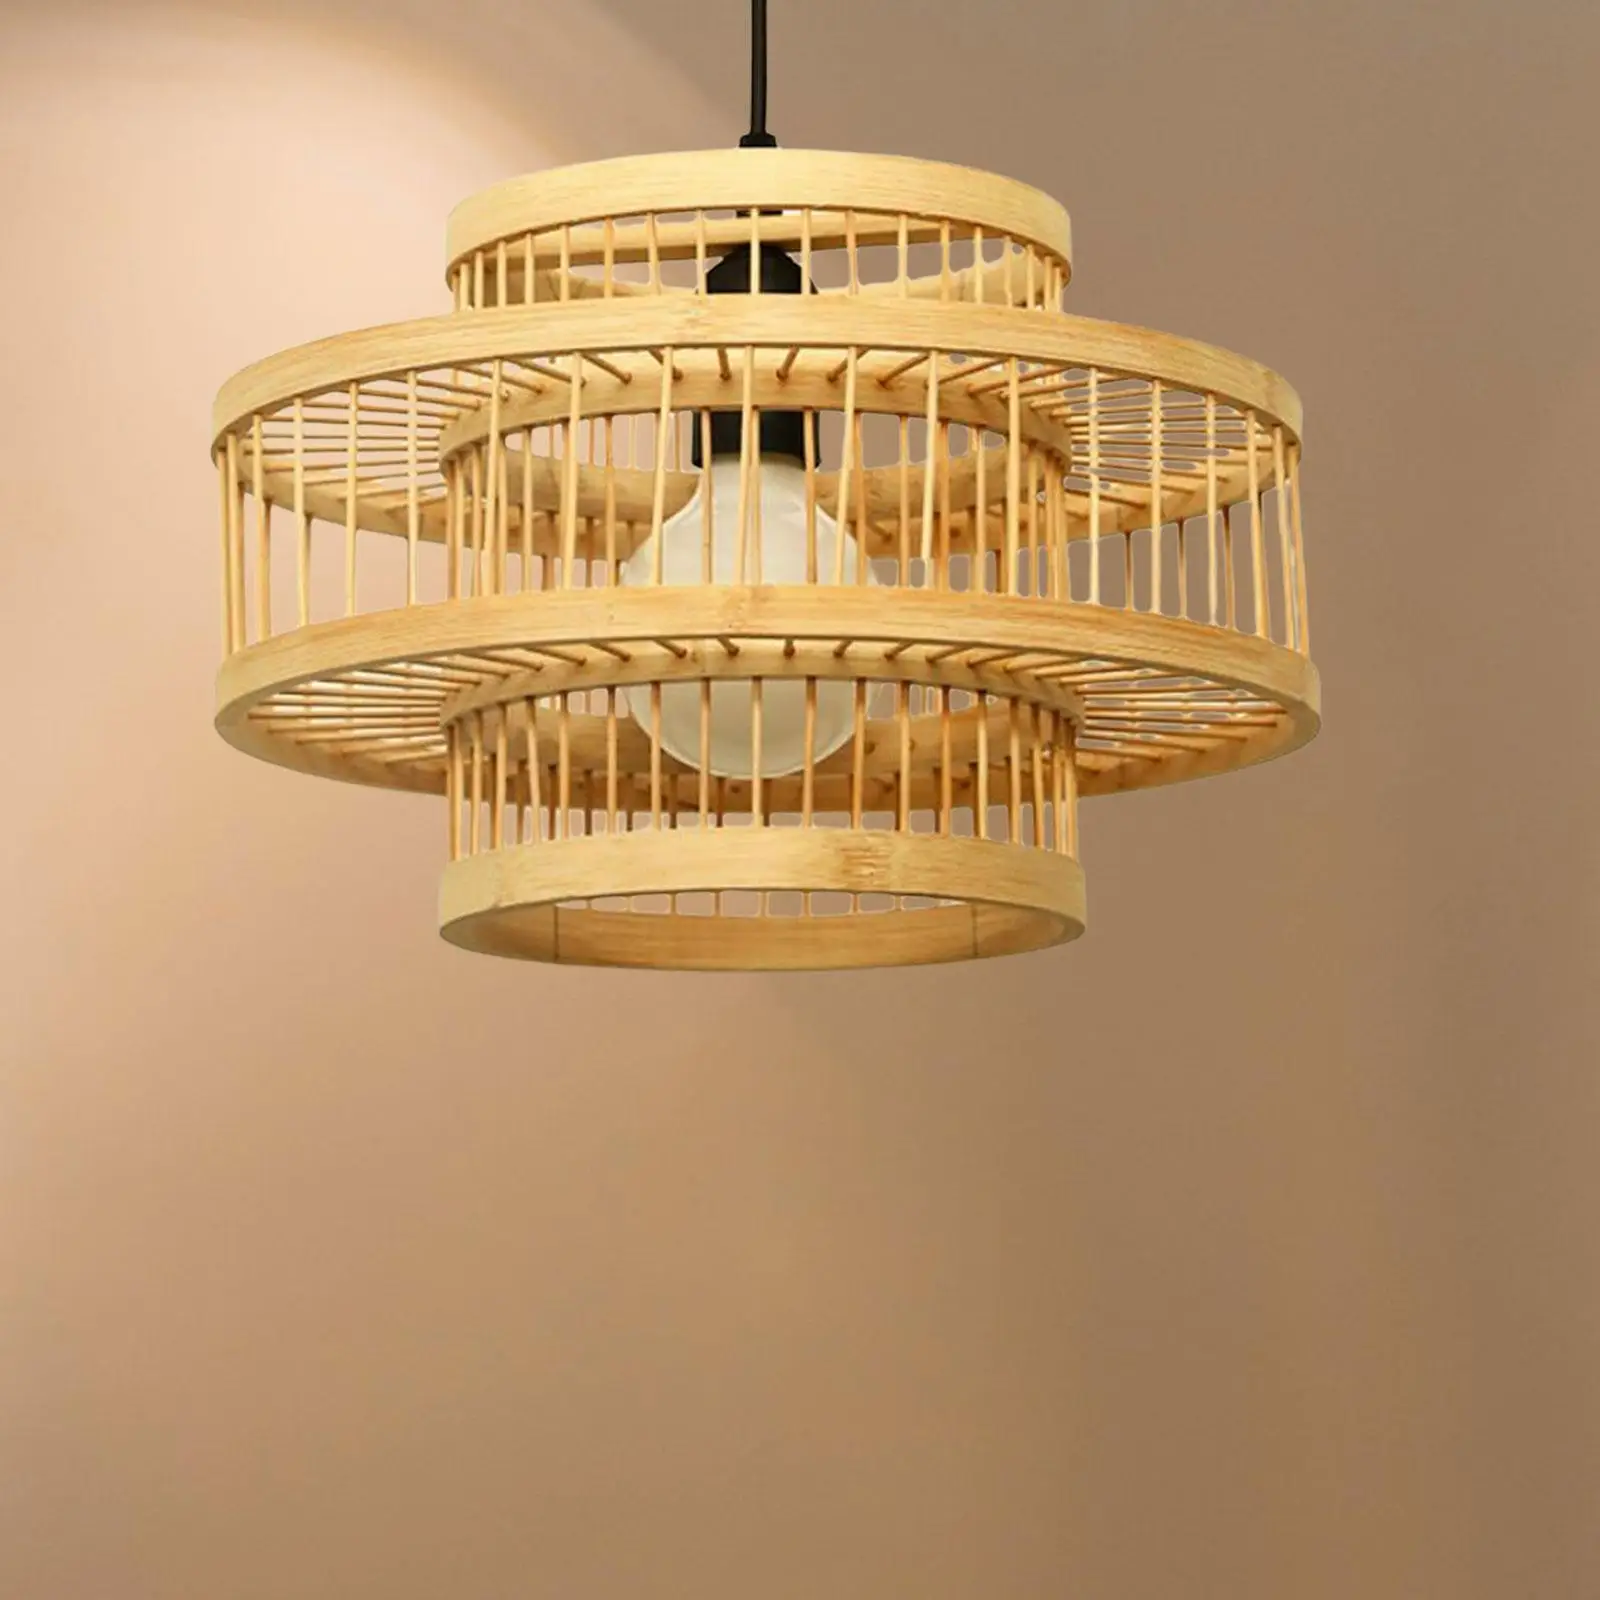 Bamboo Lamp Shade Ceiling Light Cover Chandelier Shade Hanging Retro Style Lampshade for Living Room Restaurant Kitchen Bedroom